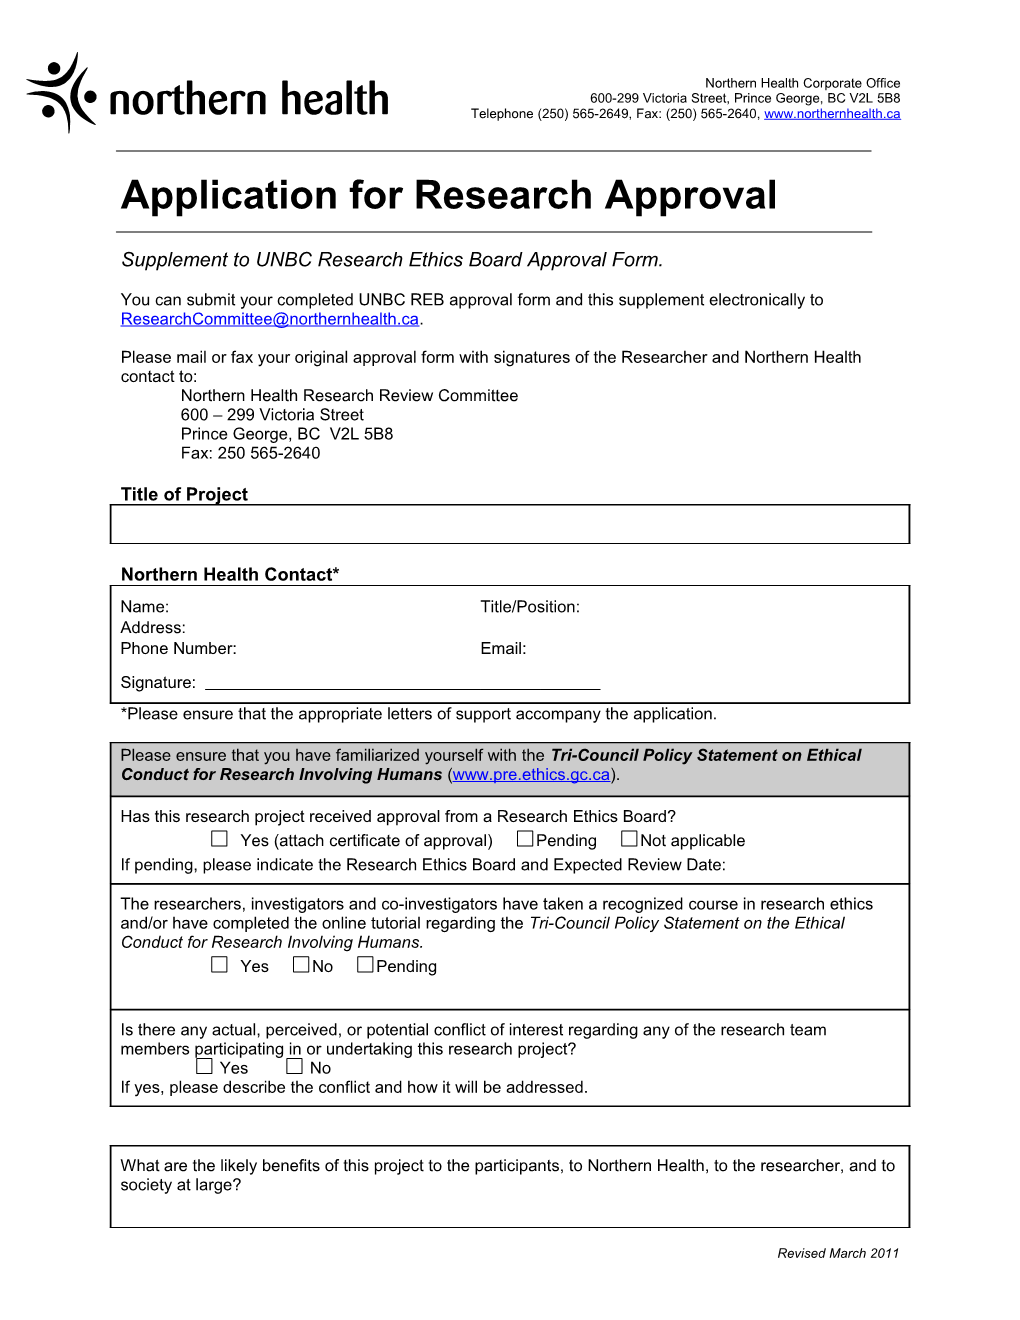 Northern Health Application for Research Approval UNBC REB Approval Form Supplementpage 1